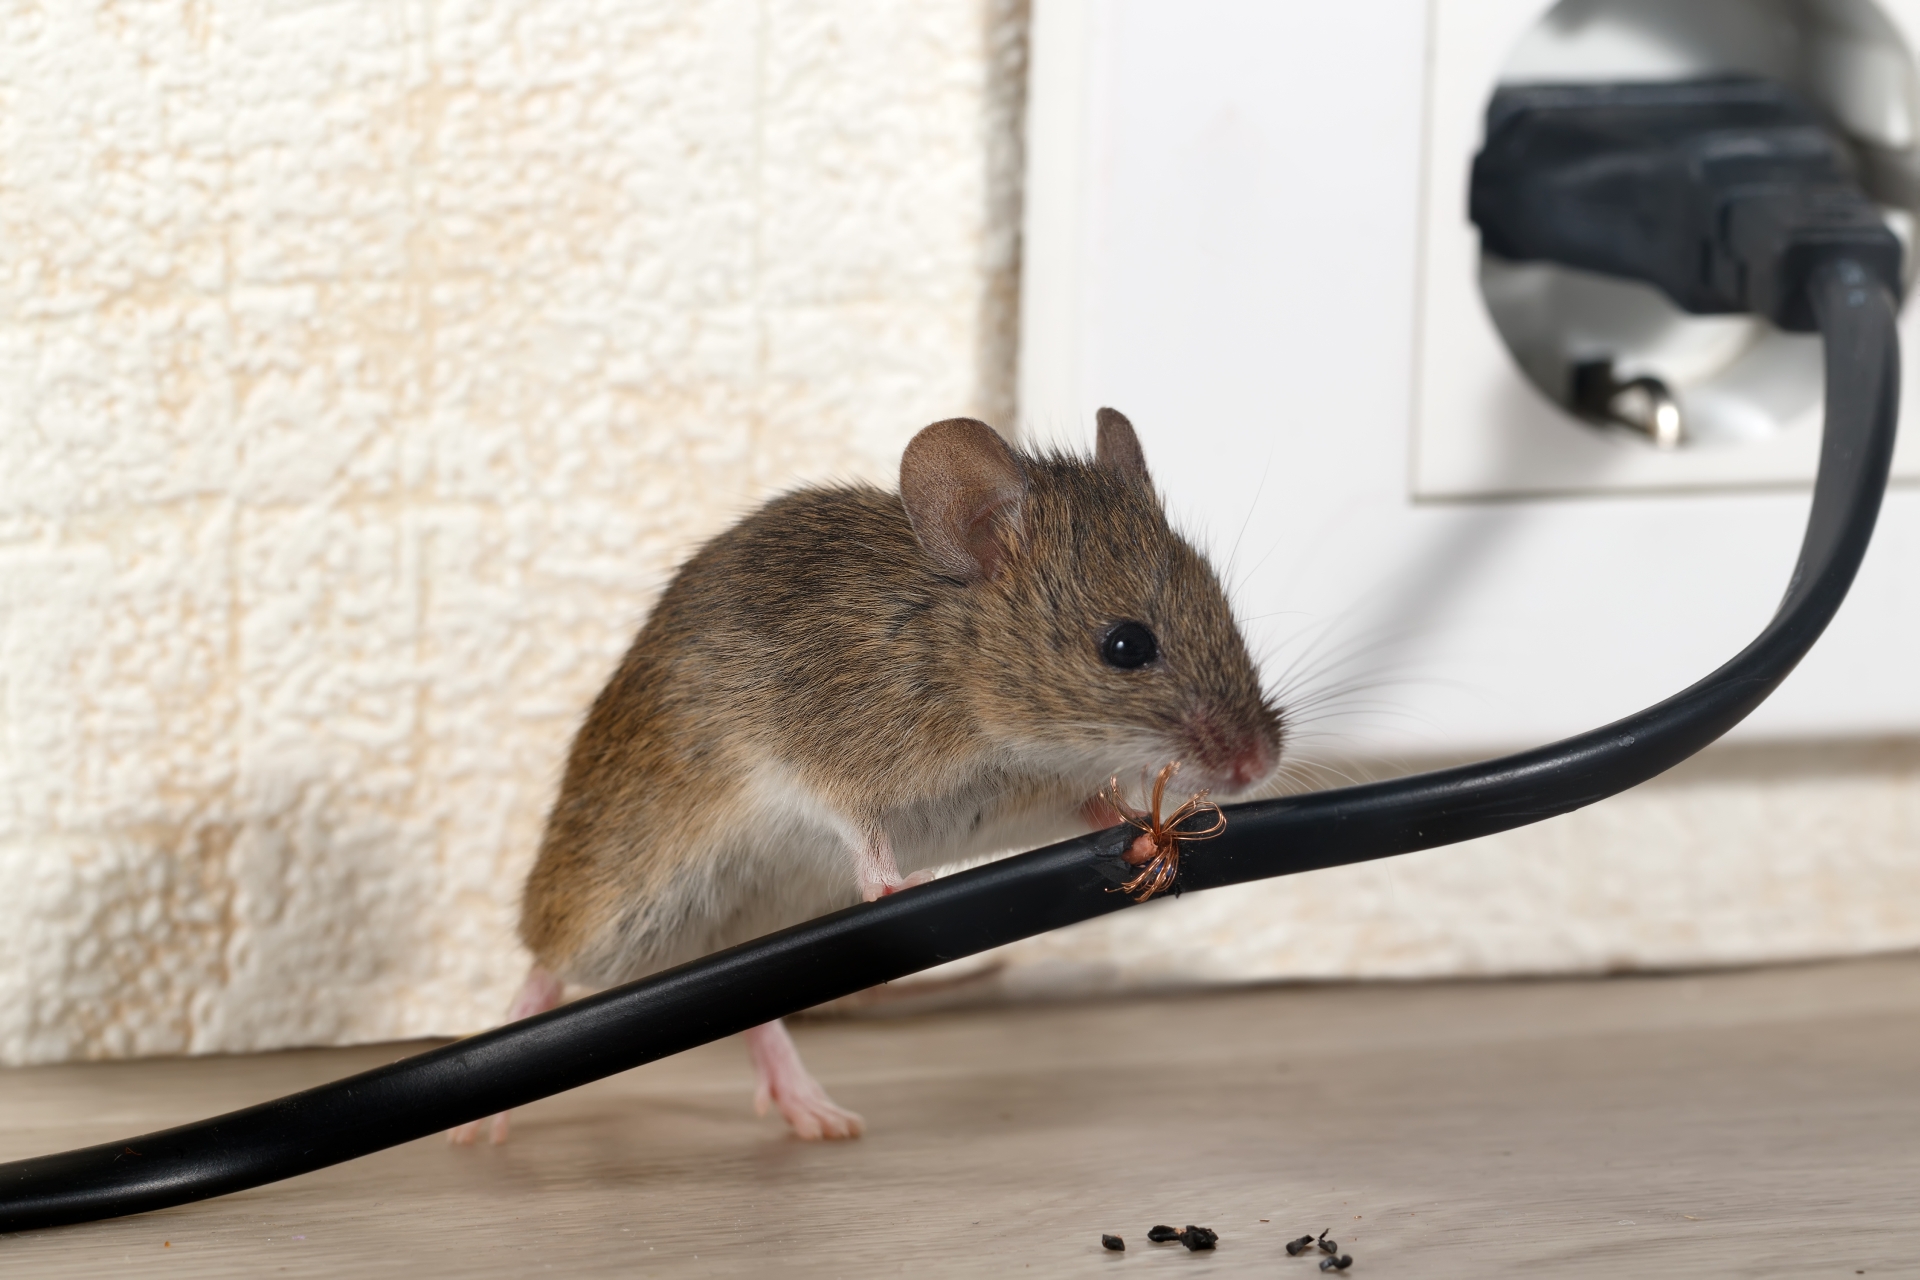 Mice Infestation, Pest Control in Brent Cross, Hendon, NW4. Call Now 020 8166 9746